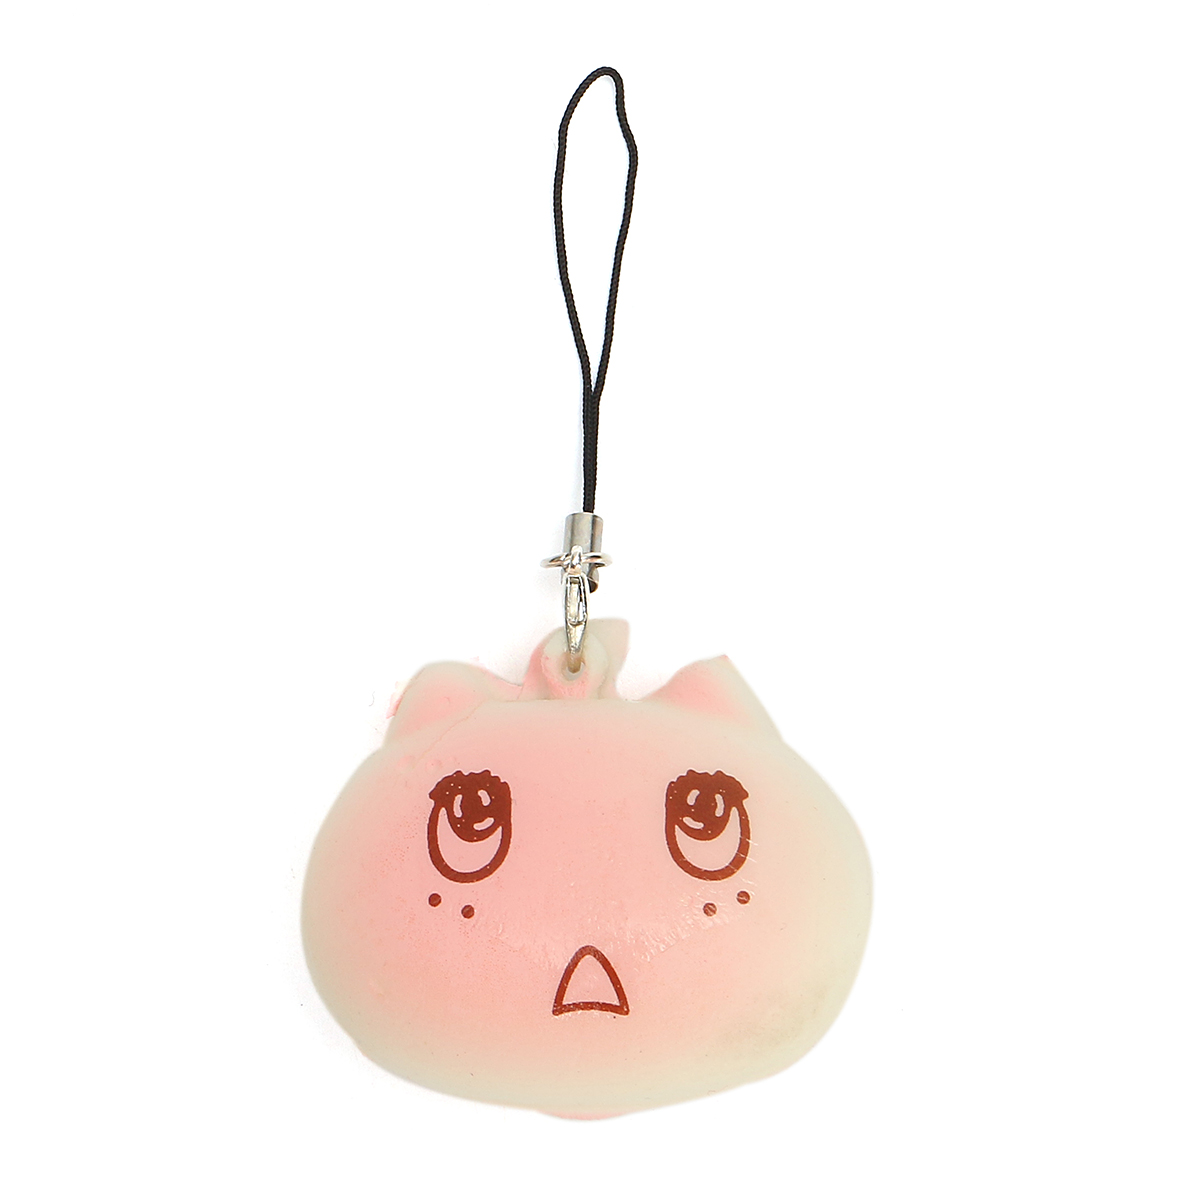 1PCS-Kawaii-Face-Simulate-Colorful-Cartoon-Totoro-Squishy-Toy-Stress-Reliever-Phone-Chain-1137334-8